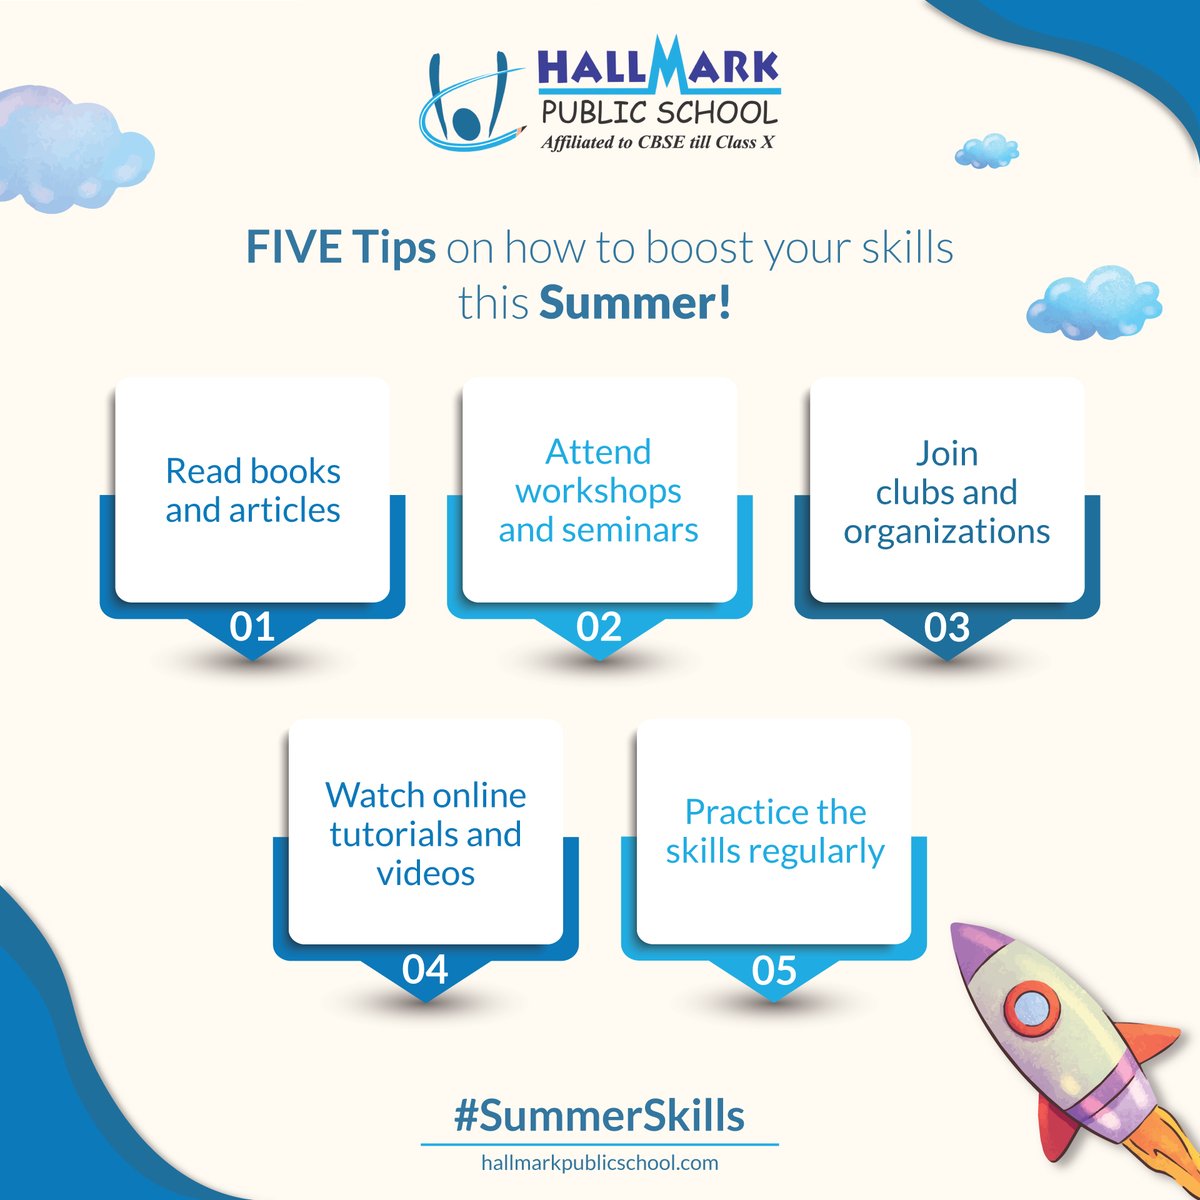 Summer is the perfect time to invest in yourself and learn new skills.
Check out our post for some tips on how to enhance your skills and achieve your goals this summer☀️

#SummerSkills #PracticalTips #EnhanceYourSkills #AchieveYourGoals #PersonalGrowth #HallmarkPublicSchool